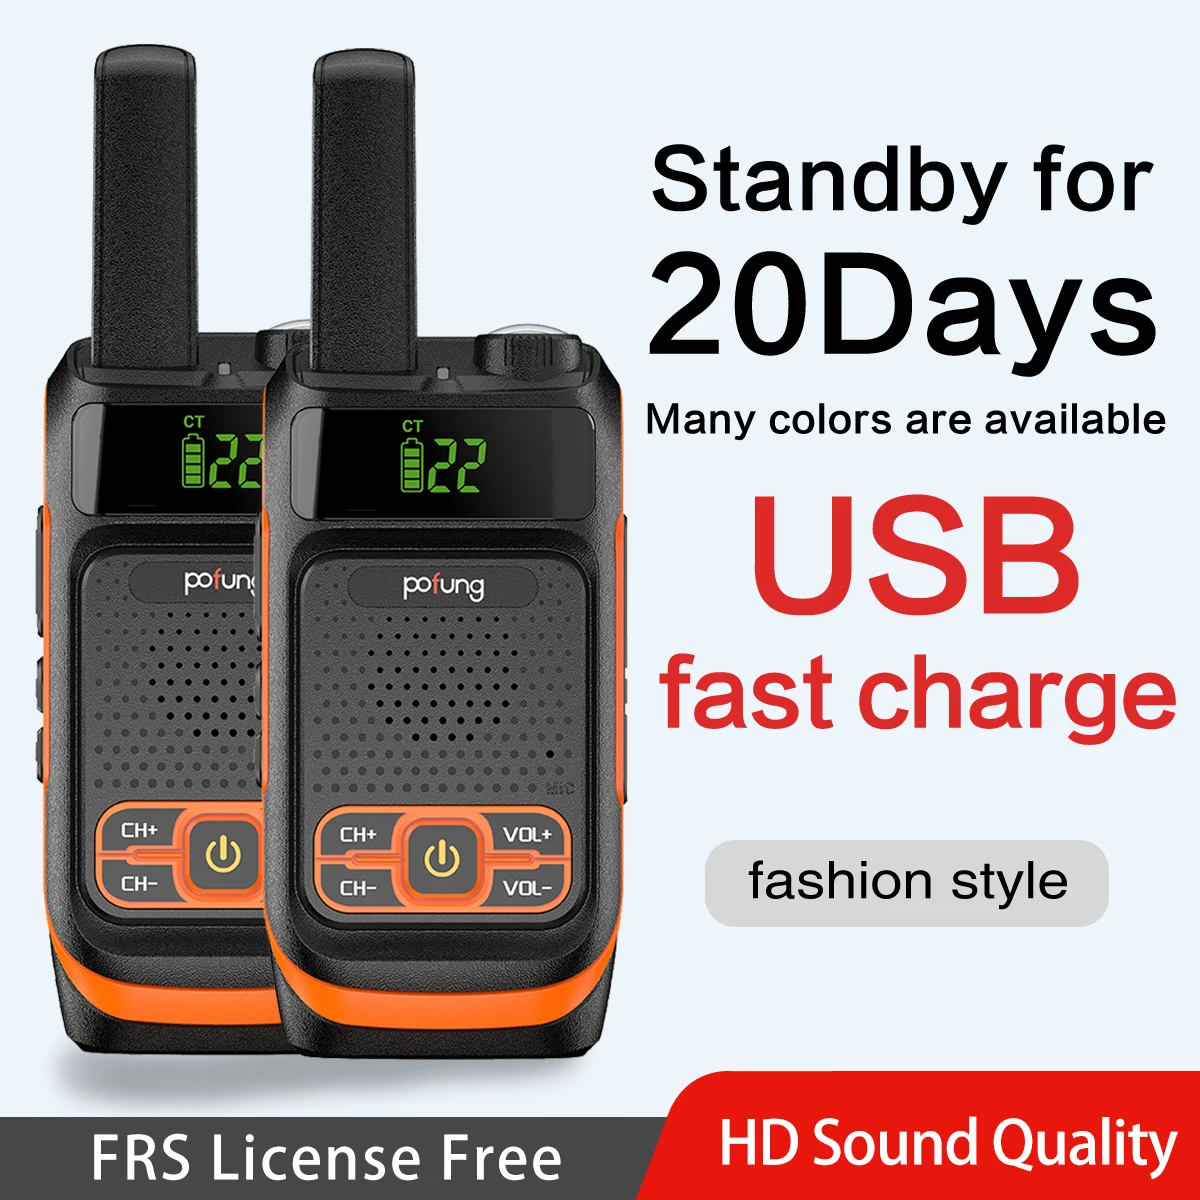 2PCS BAOFENG Pofung T19 FRS/GMRS Radio Long Range Rechargeable With 1200mAH Battery Two Way Radio Handheld Hzm Walkie Talkie